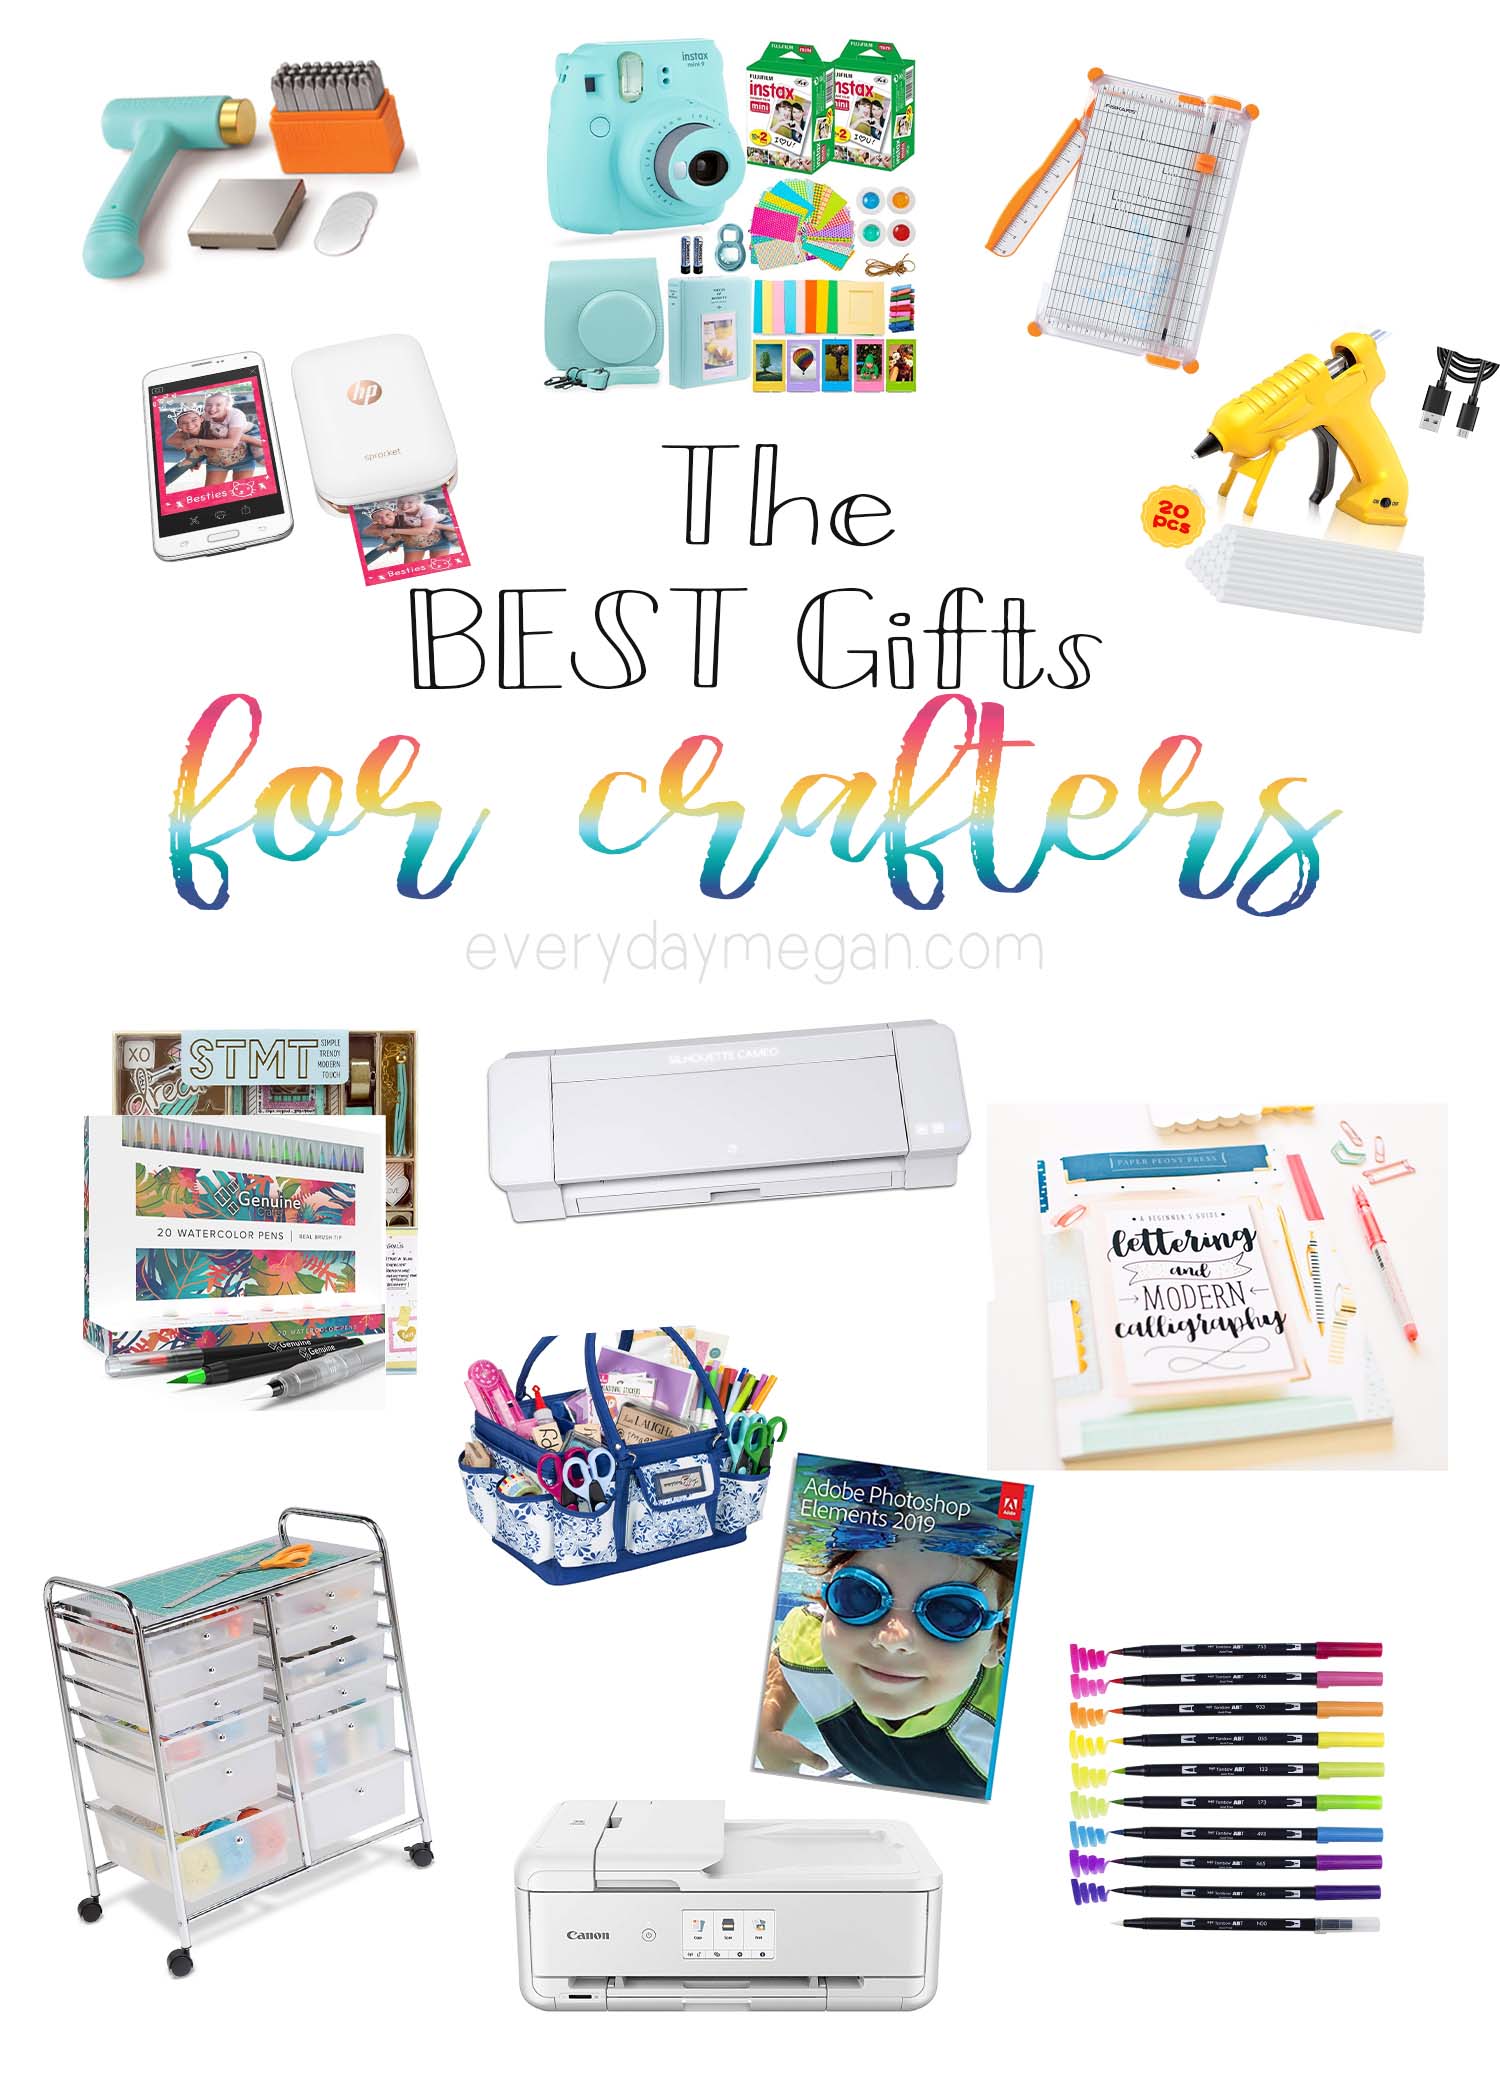 Get some good gift idea inspiration for crafters and makers!